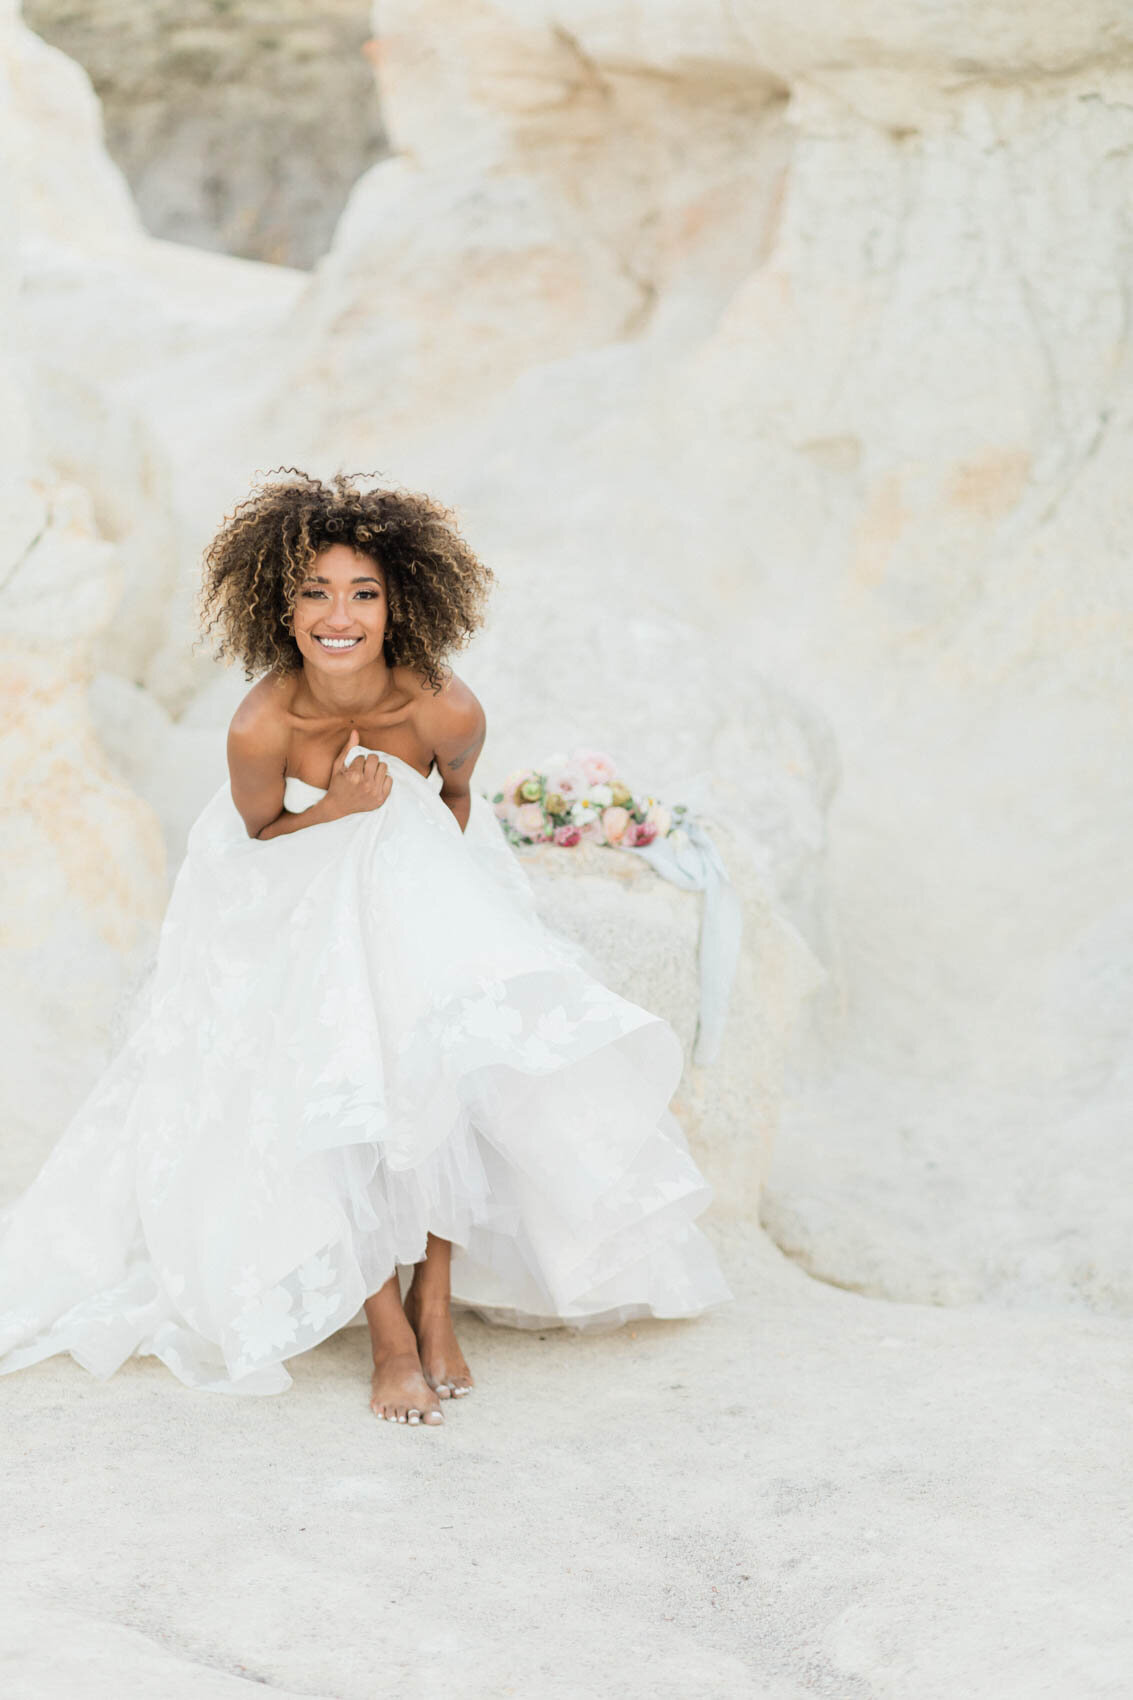 ethereal_editorial_at_the_Paint_mines_for_rocky_mountain_bride_by_colorado_wedding_photographer_diana_coulter-24